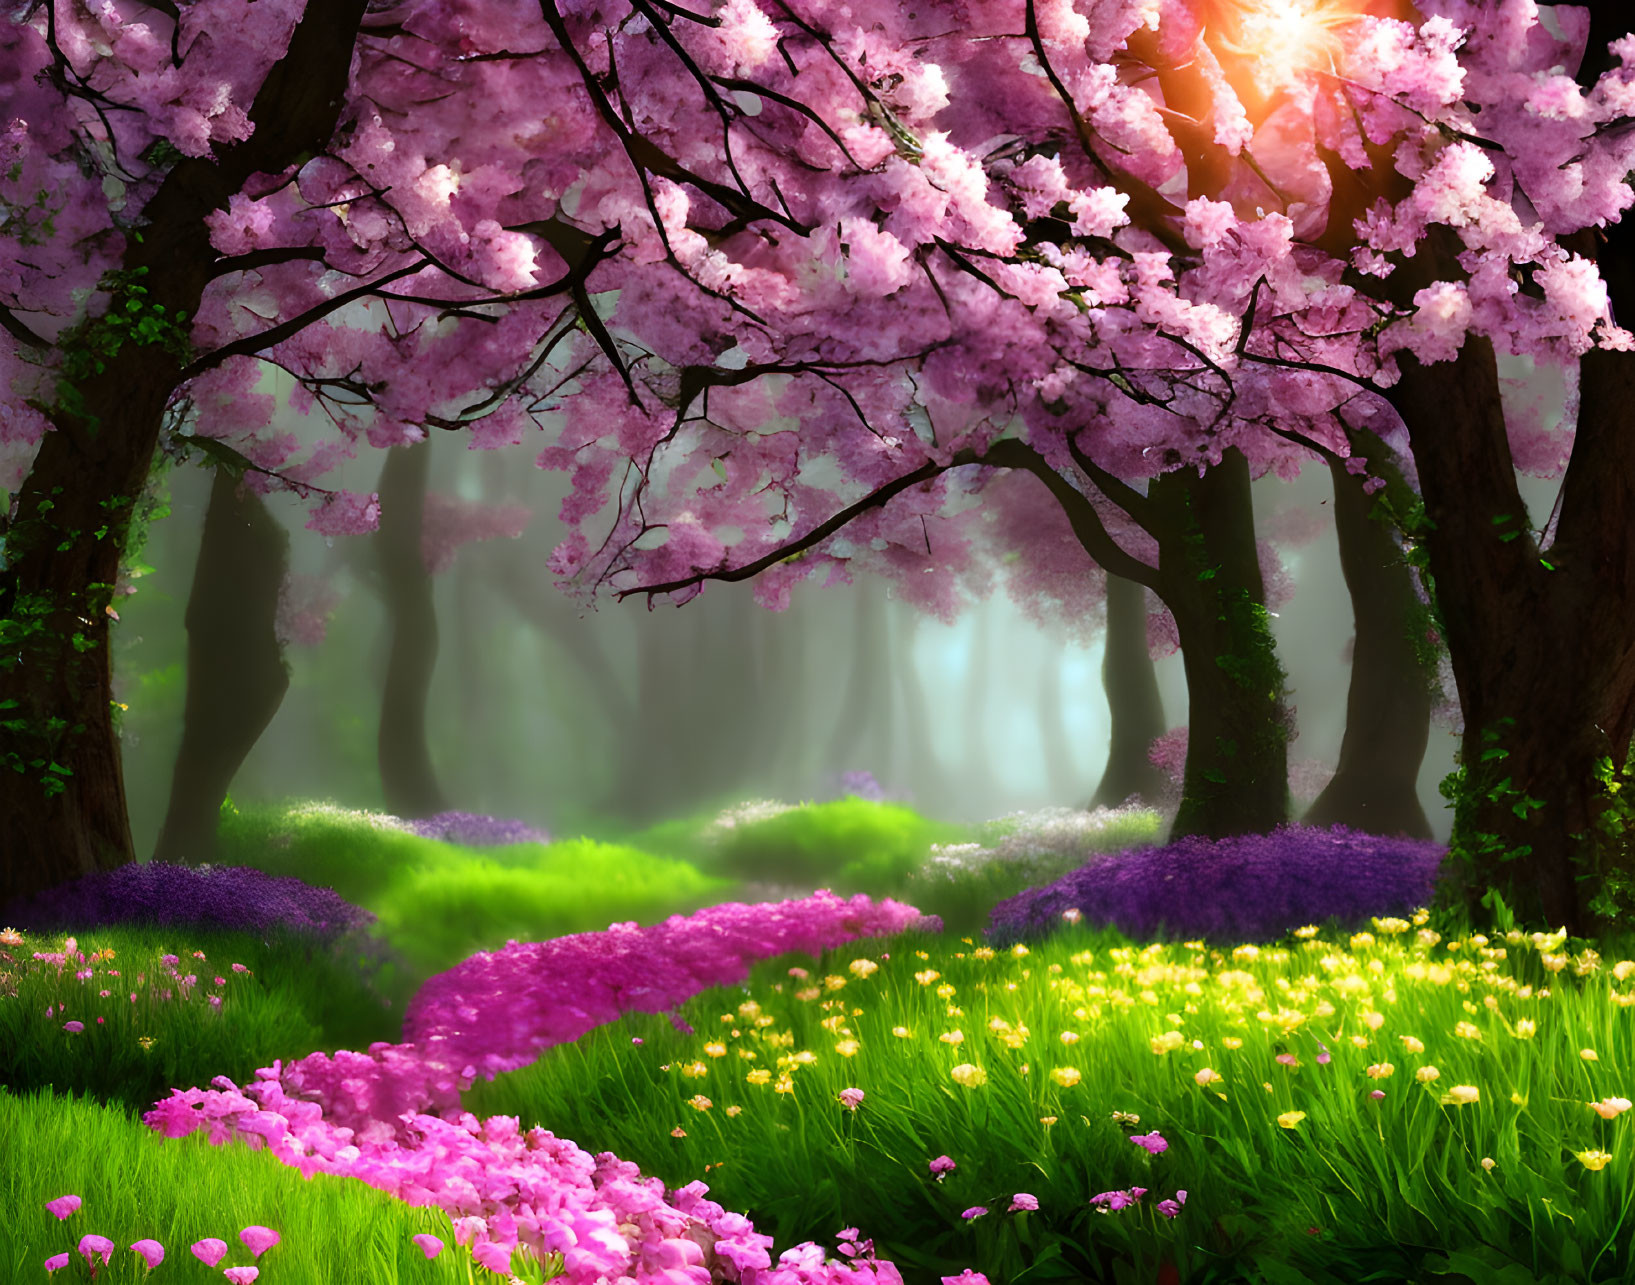 Lush forest glade with pink cherry blossoms, sunlight, and colorful flowers